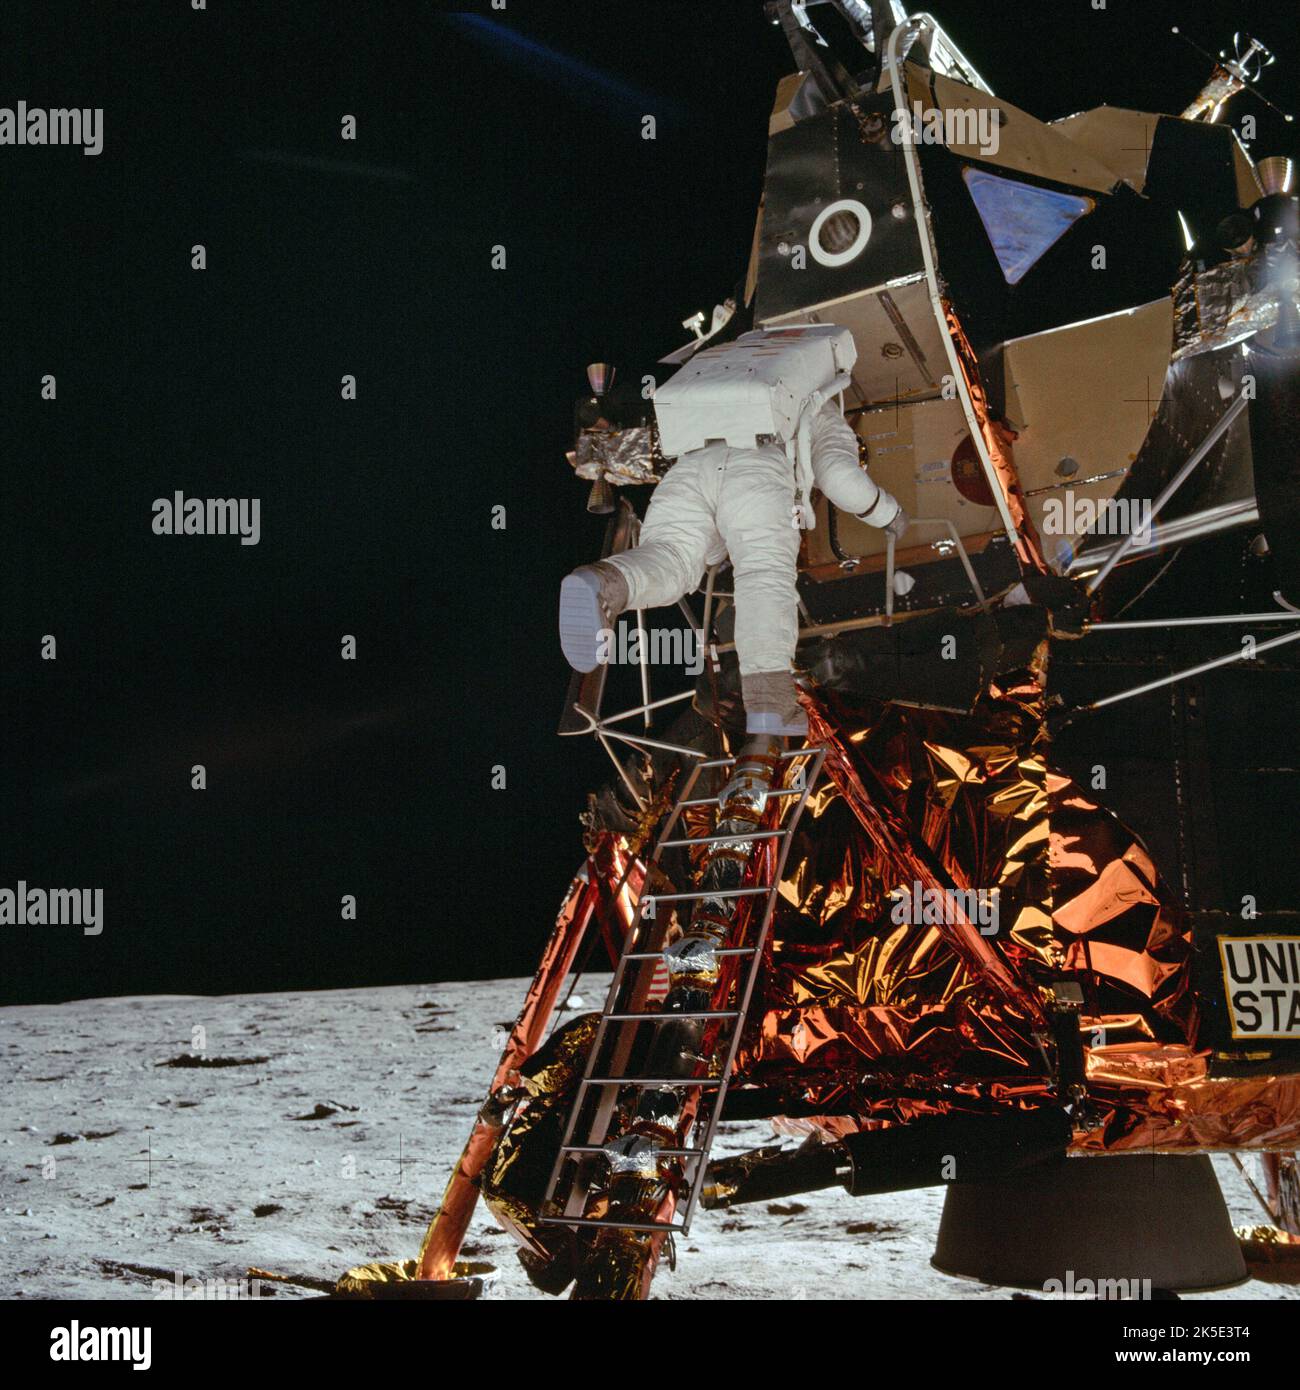 Apollo 11. First moon landing, 20 July 1969. Here, Astronaut Buzz Aldrin steps off the ladder from the Lunar Module and onto the moon's surface. Photo by Astronaut Neil Armstrong, who had, for 18 minutes, been the only human to have set foot on the moon. After this photo was taken, humans in the plural achieved this goal. For this reason, perhaps this is one of the most compelling photo of all moon landings. An ptimised NASA image. Credit: NASA Stock Photo